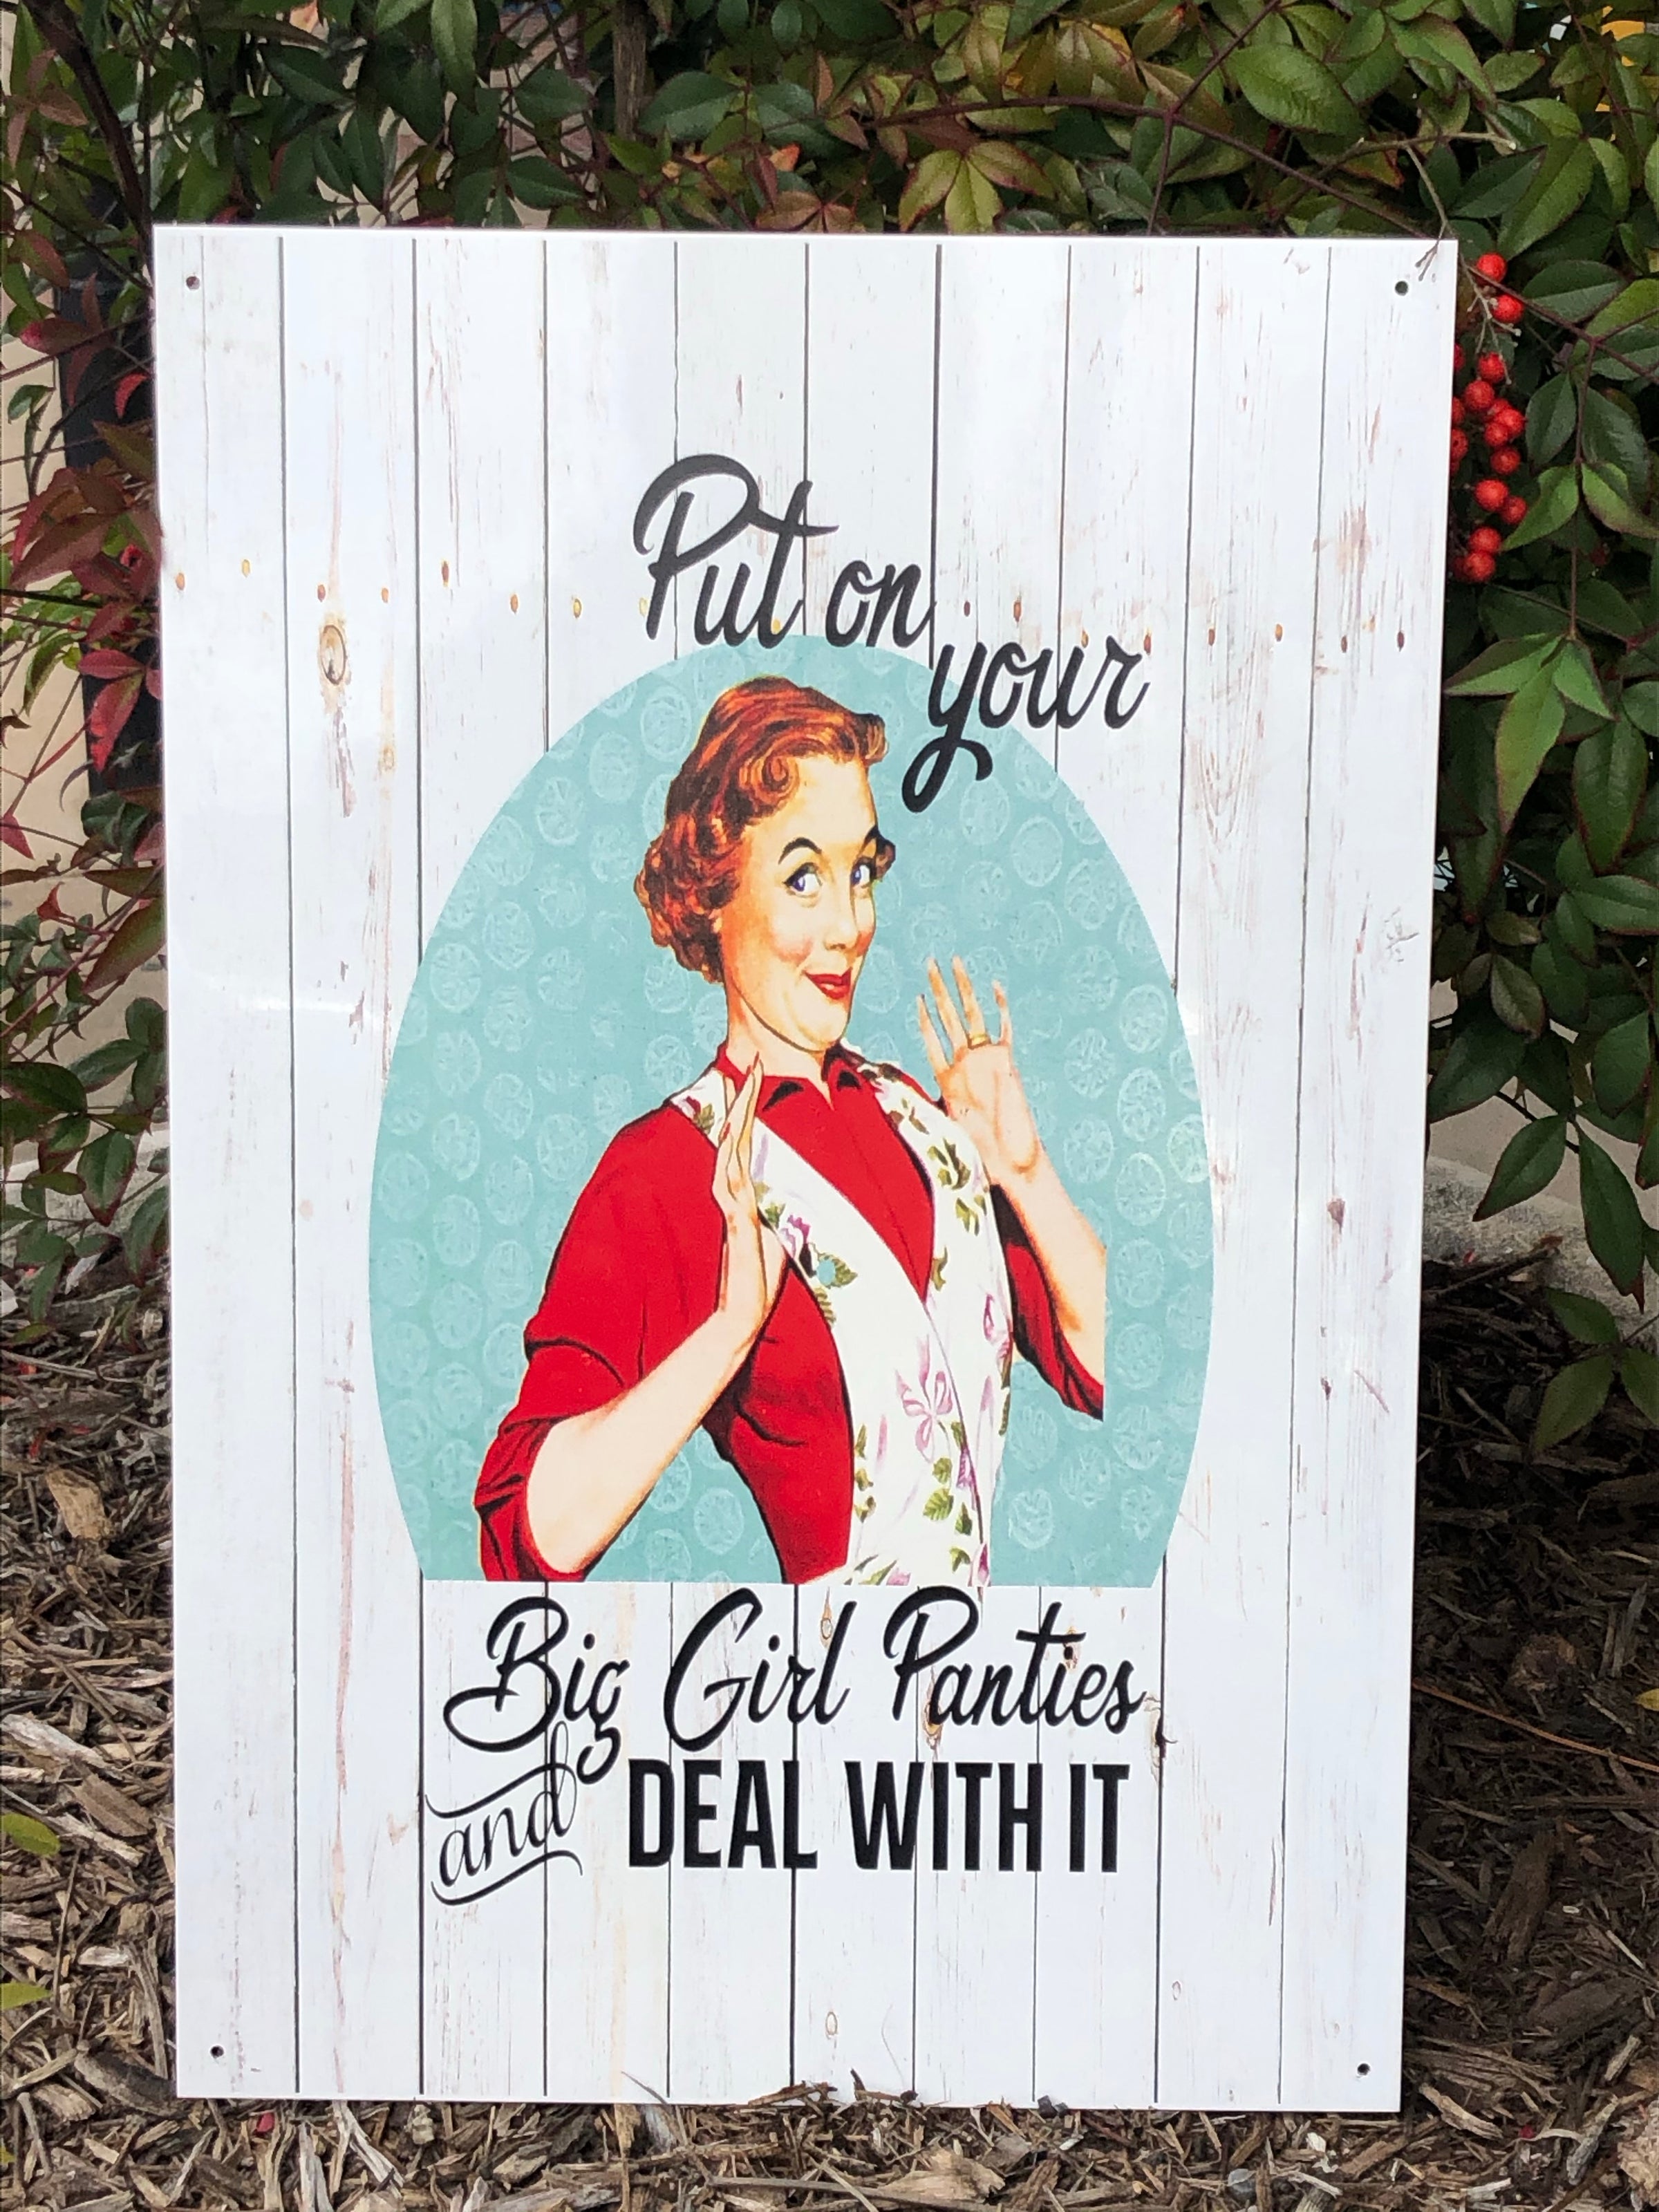 PUT YOUR BIG girl pants on retro metal sign/plaque novelty gift SHABBY CHIC  £3.42 - PicClick UK